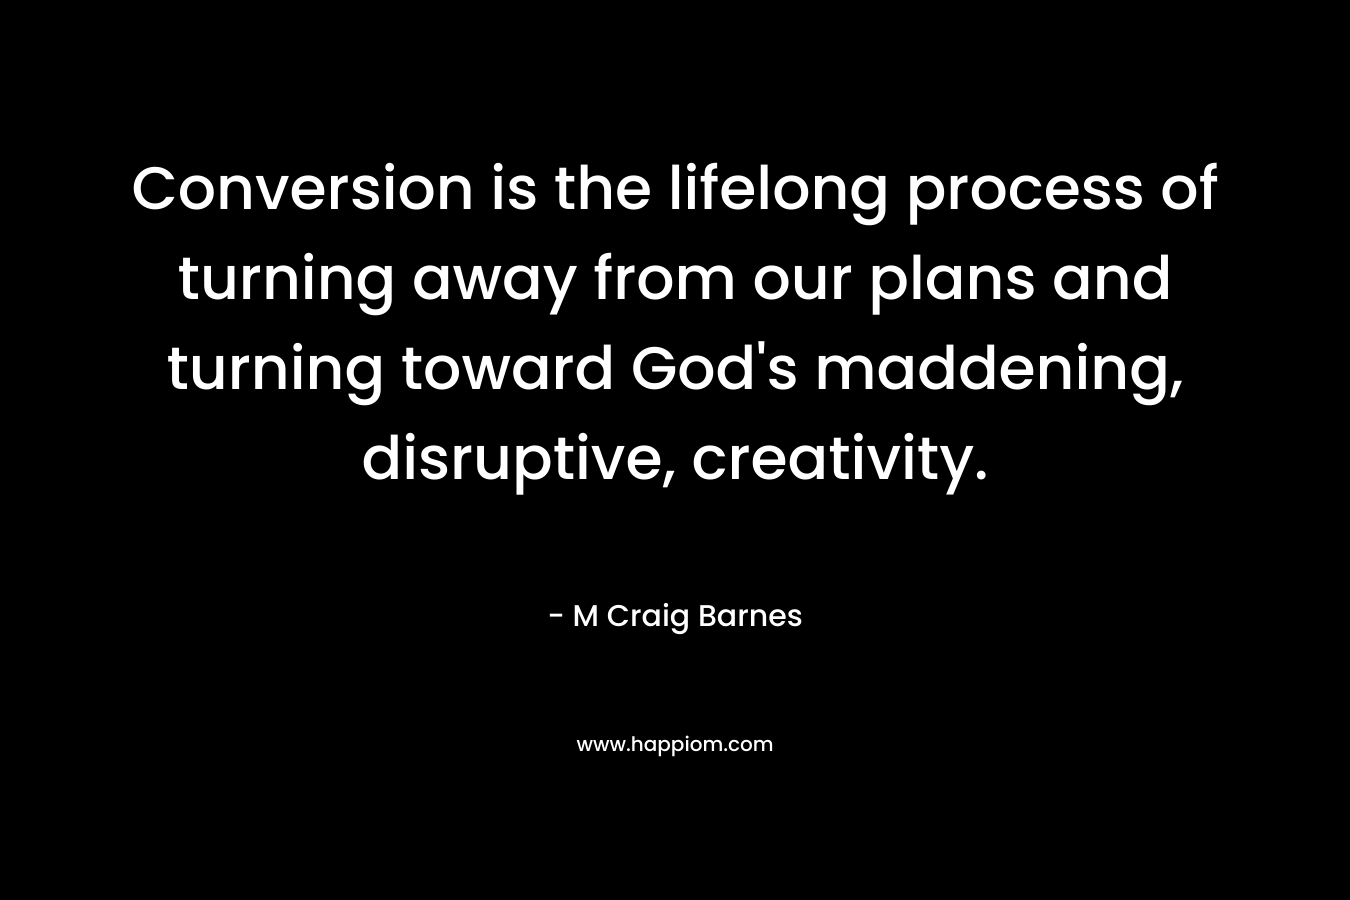 Conversion is the lifelong process of turning away from our plans and turning toward God's maddening, disruptive, creativity.